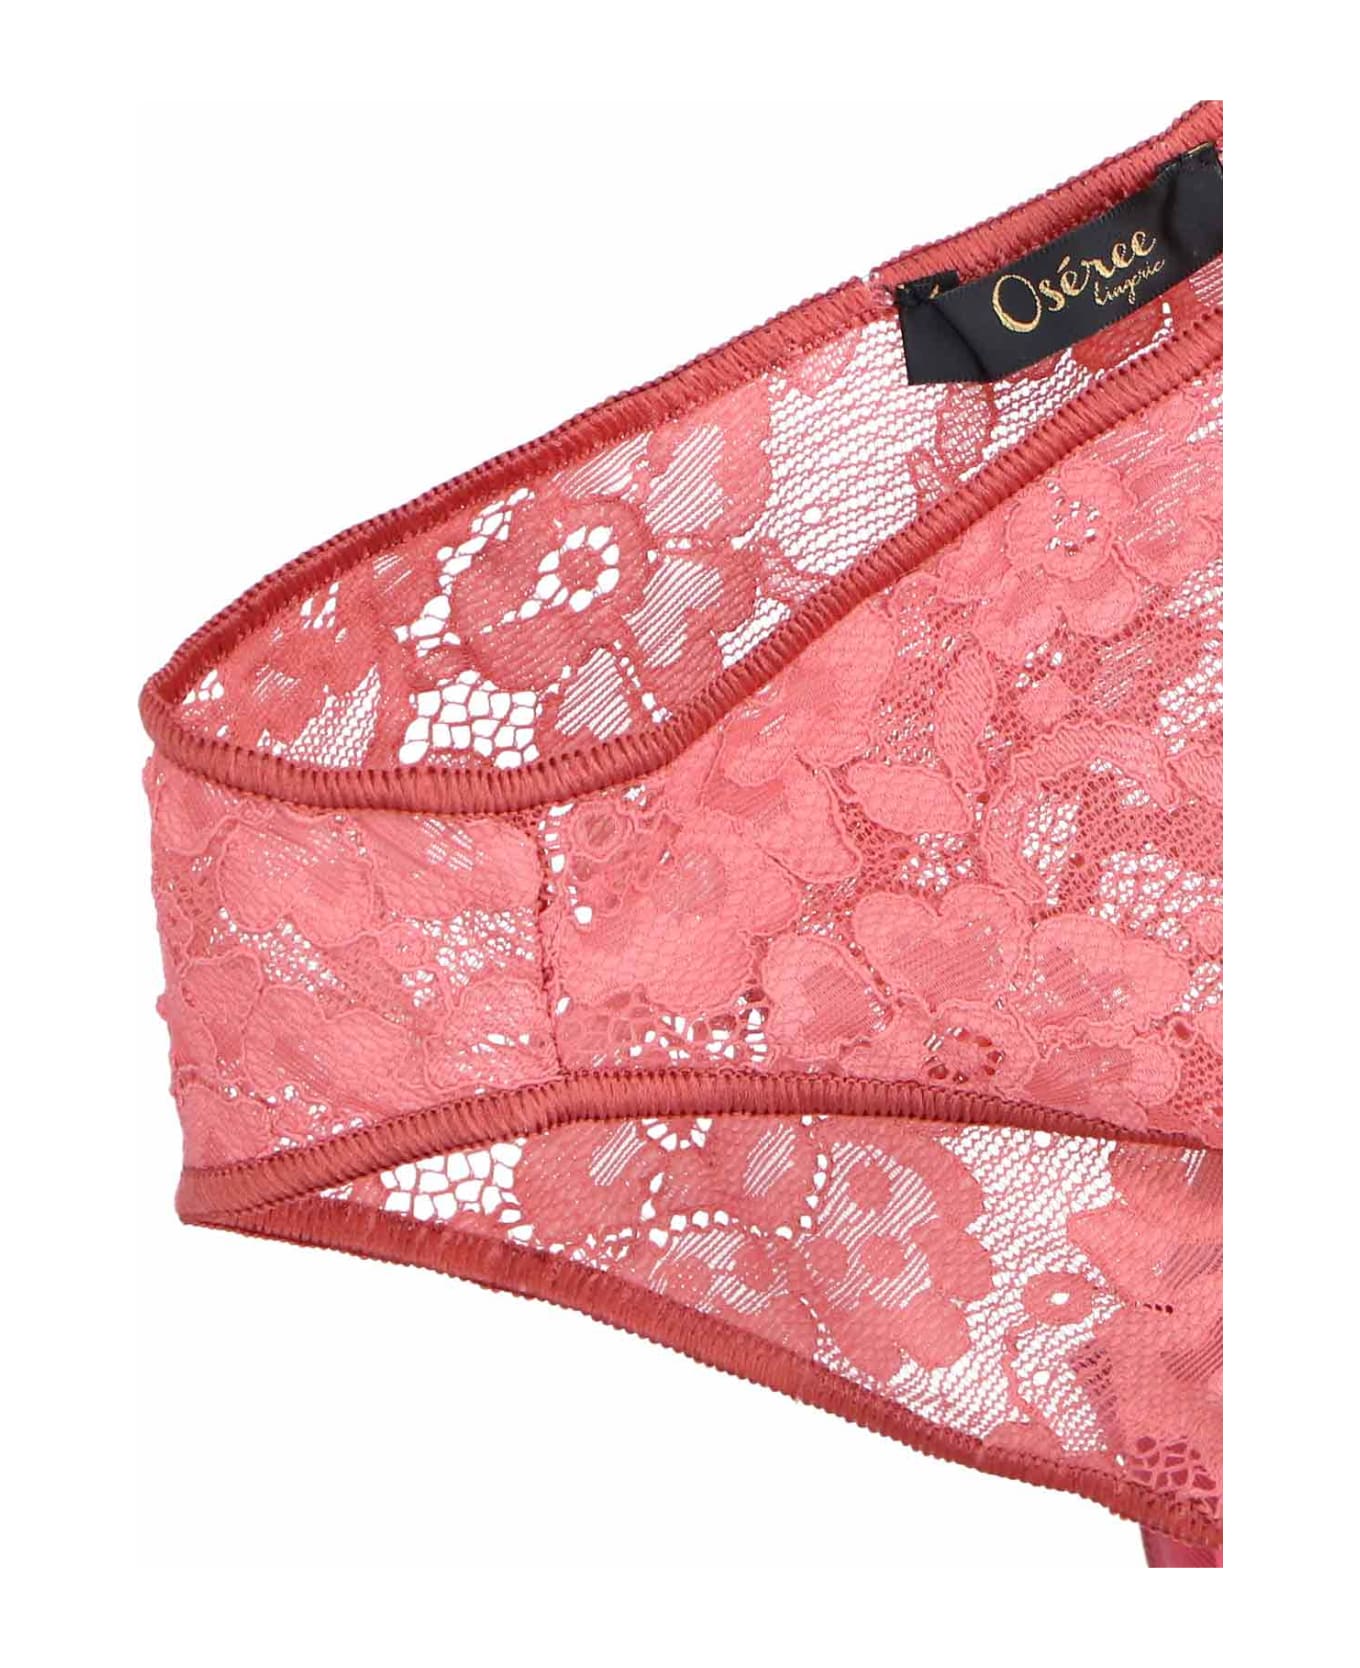 Oseree Lace Briefs - Pink ショーツ